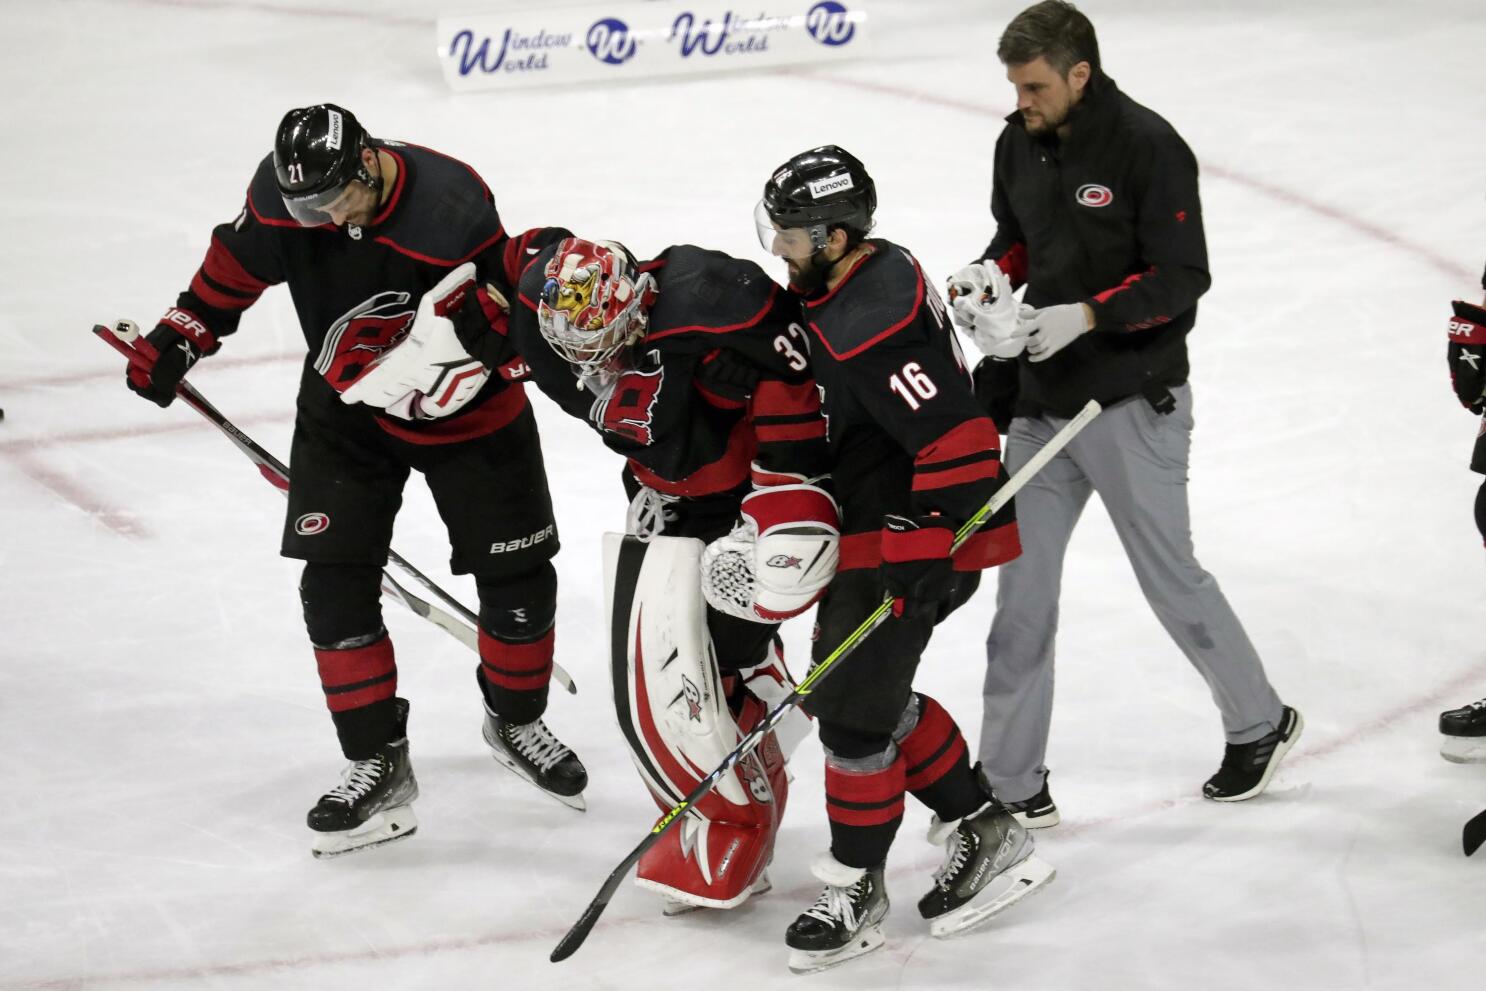 Hurricanes news: Canes' big Antti Raanta decision for Game 7 vs. Rangers